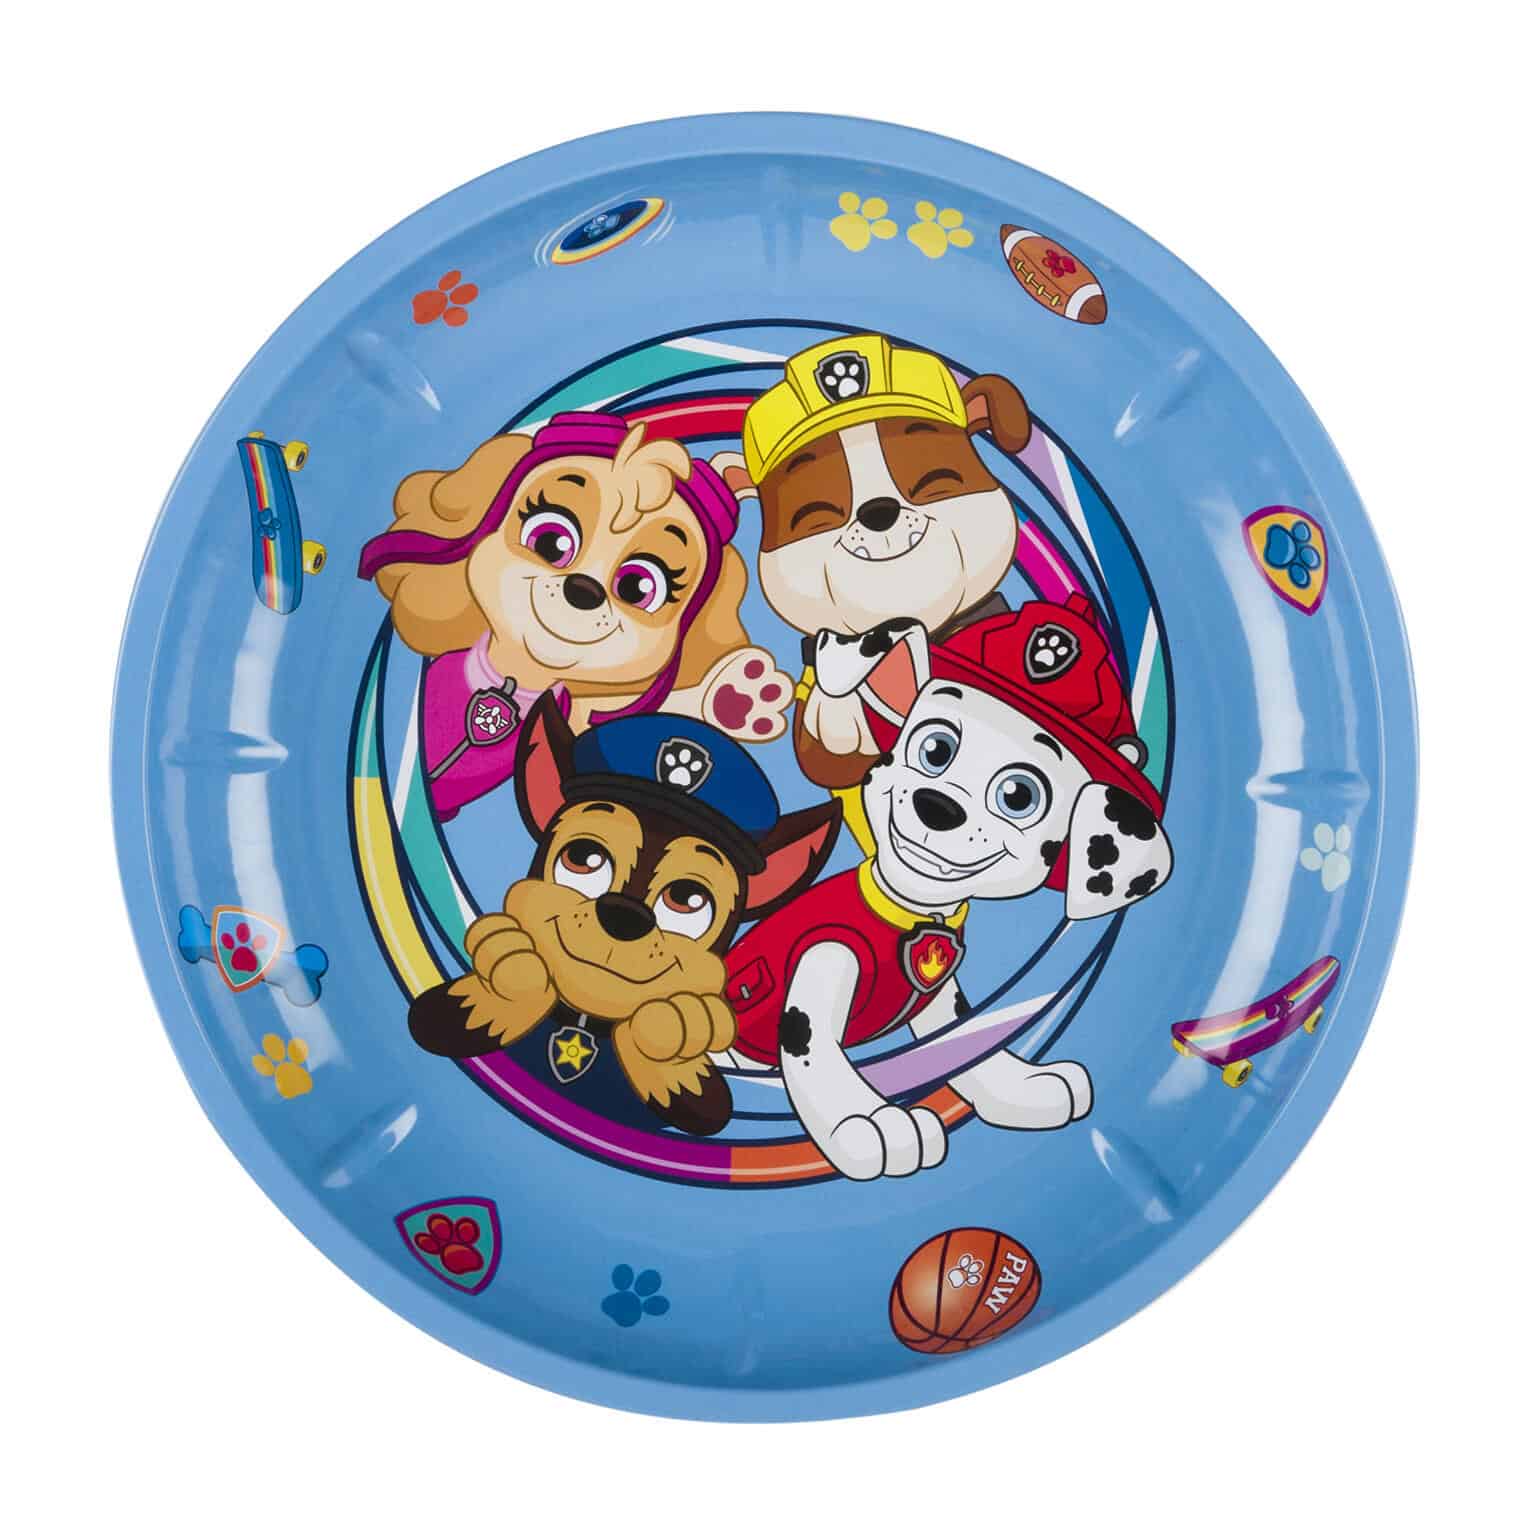 This Paw Patrol Serving Tin Bowl By The Tin Box Company 10.25" Plate (27cm) is made with love by Premier Homegoods! Shop more unique gift ideas today with Spots Initiatives, the best way to support creators.